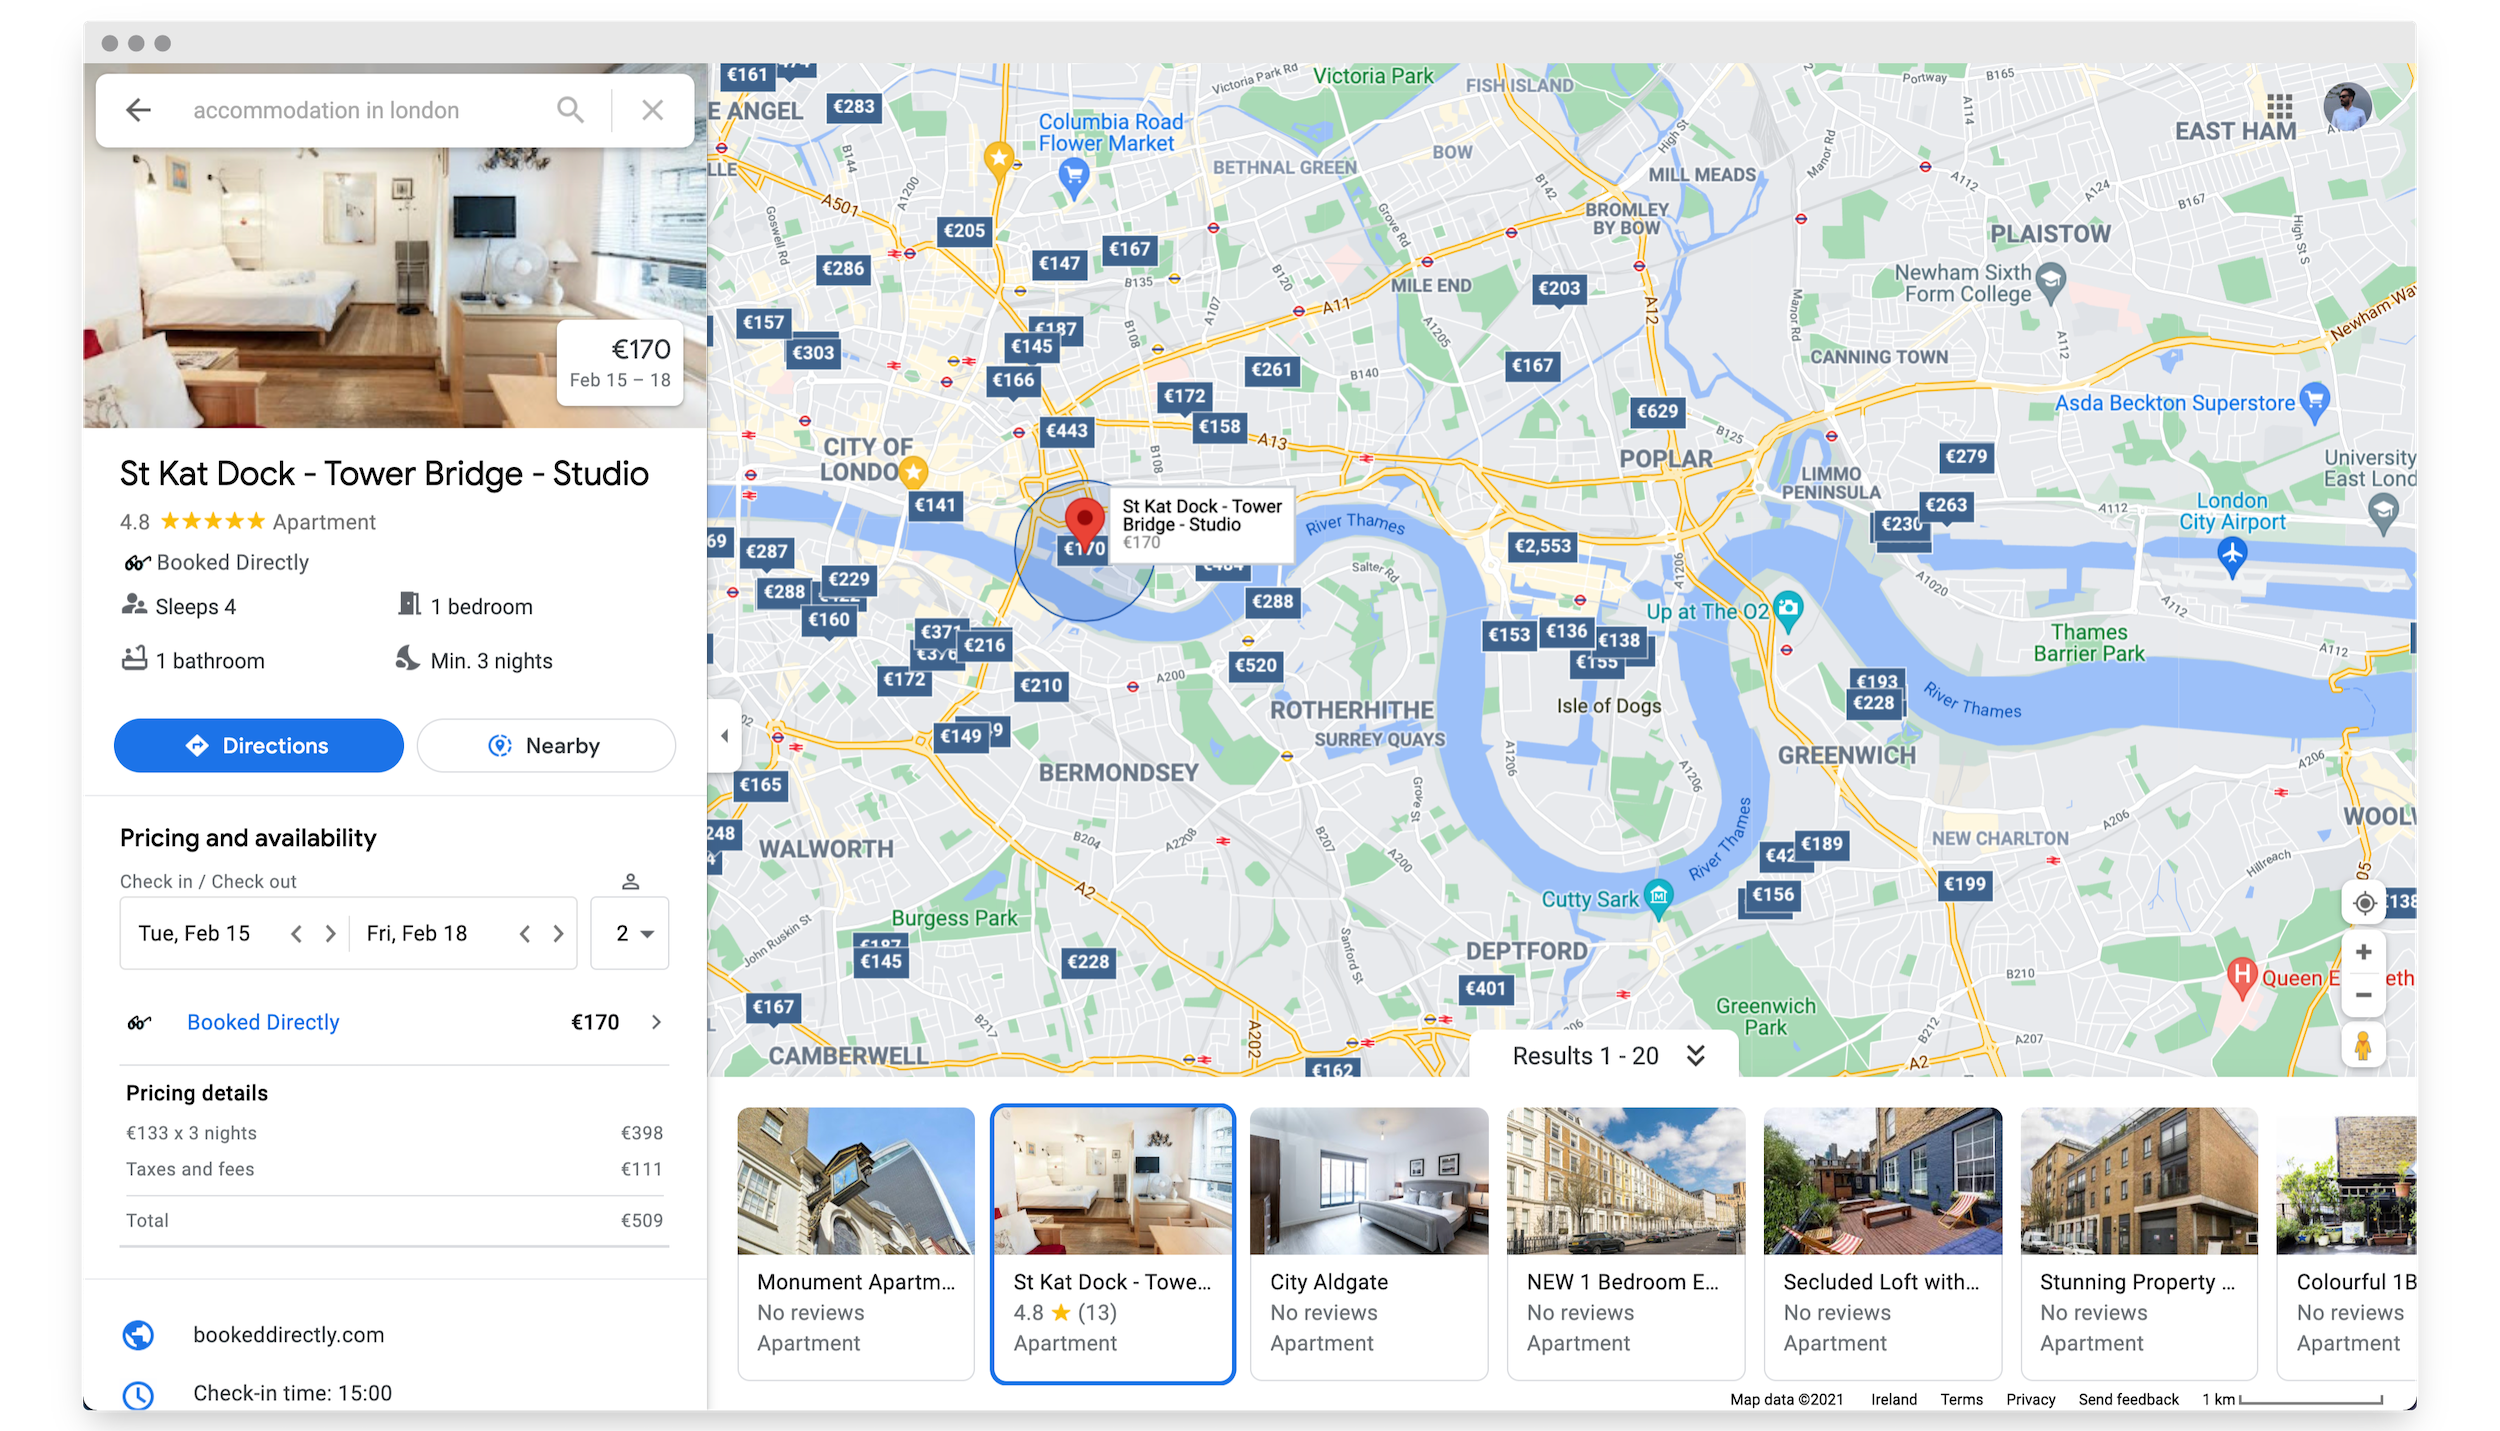 Google Vacation Rentals appearing on Google Maps